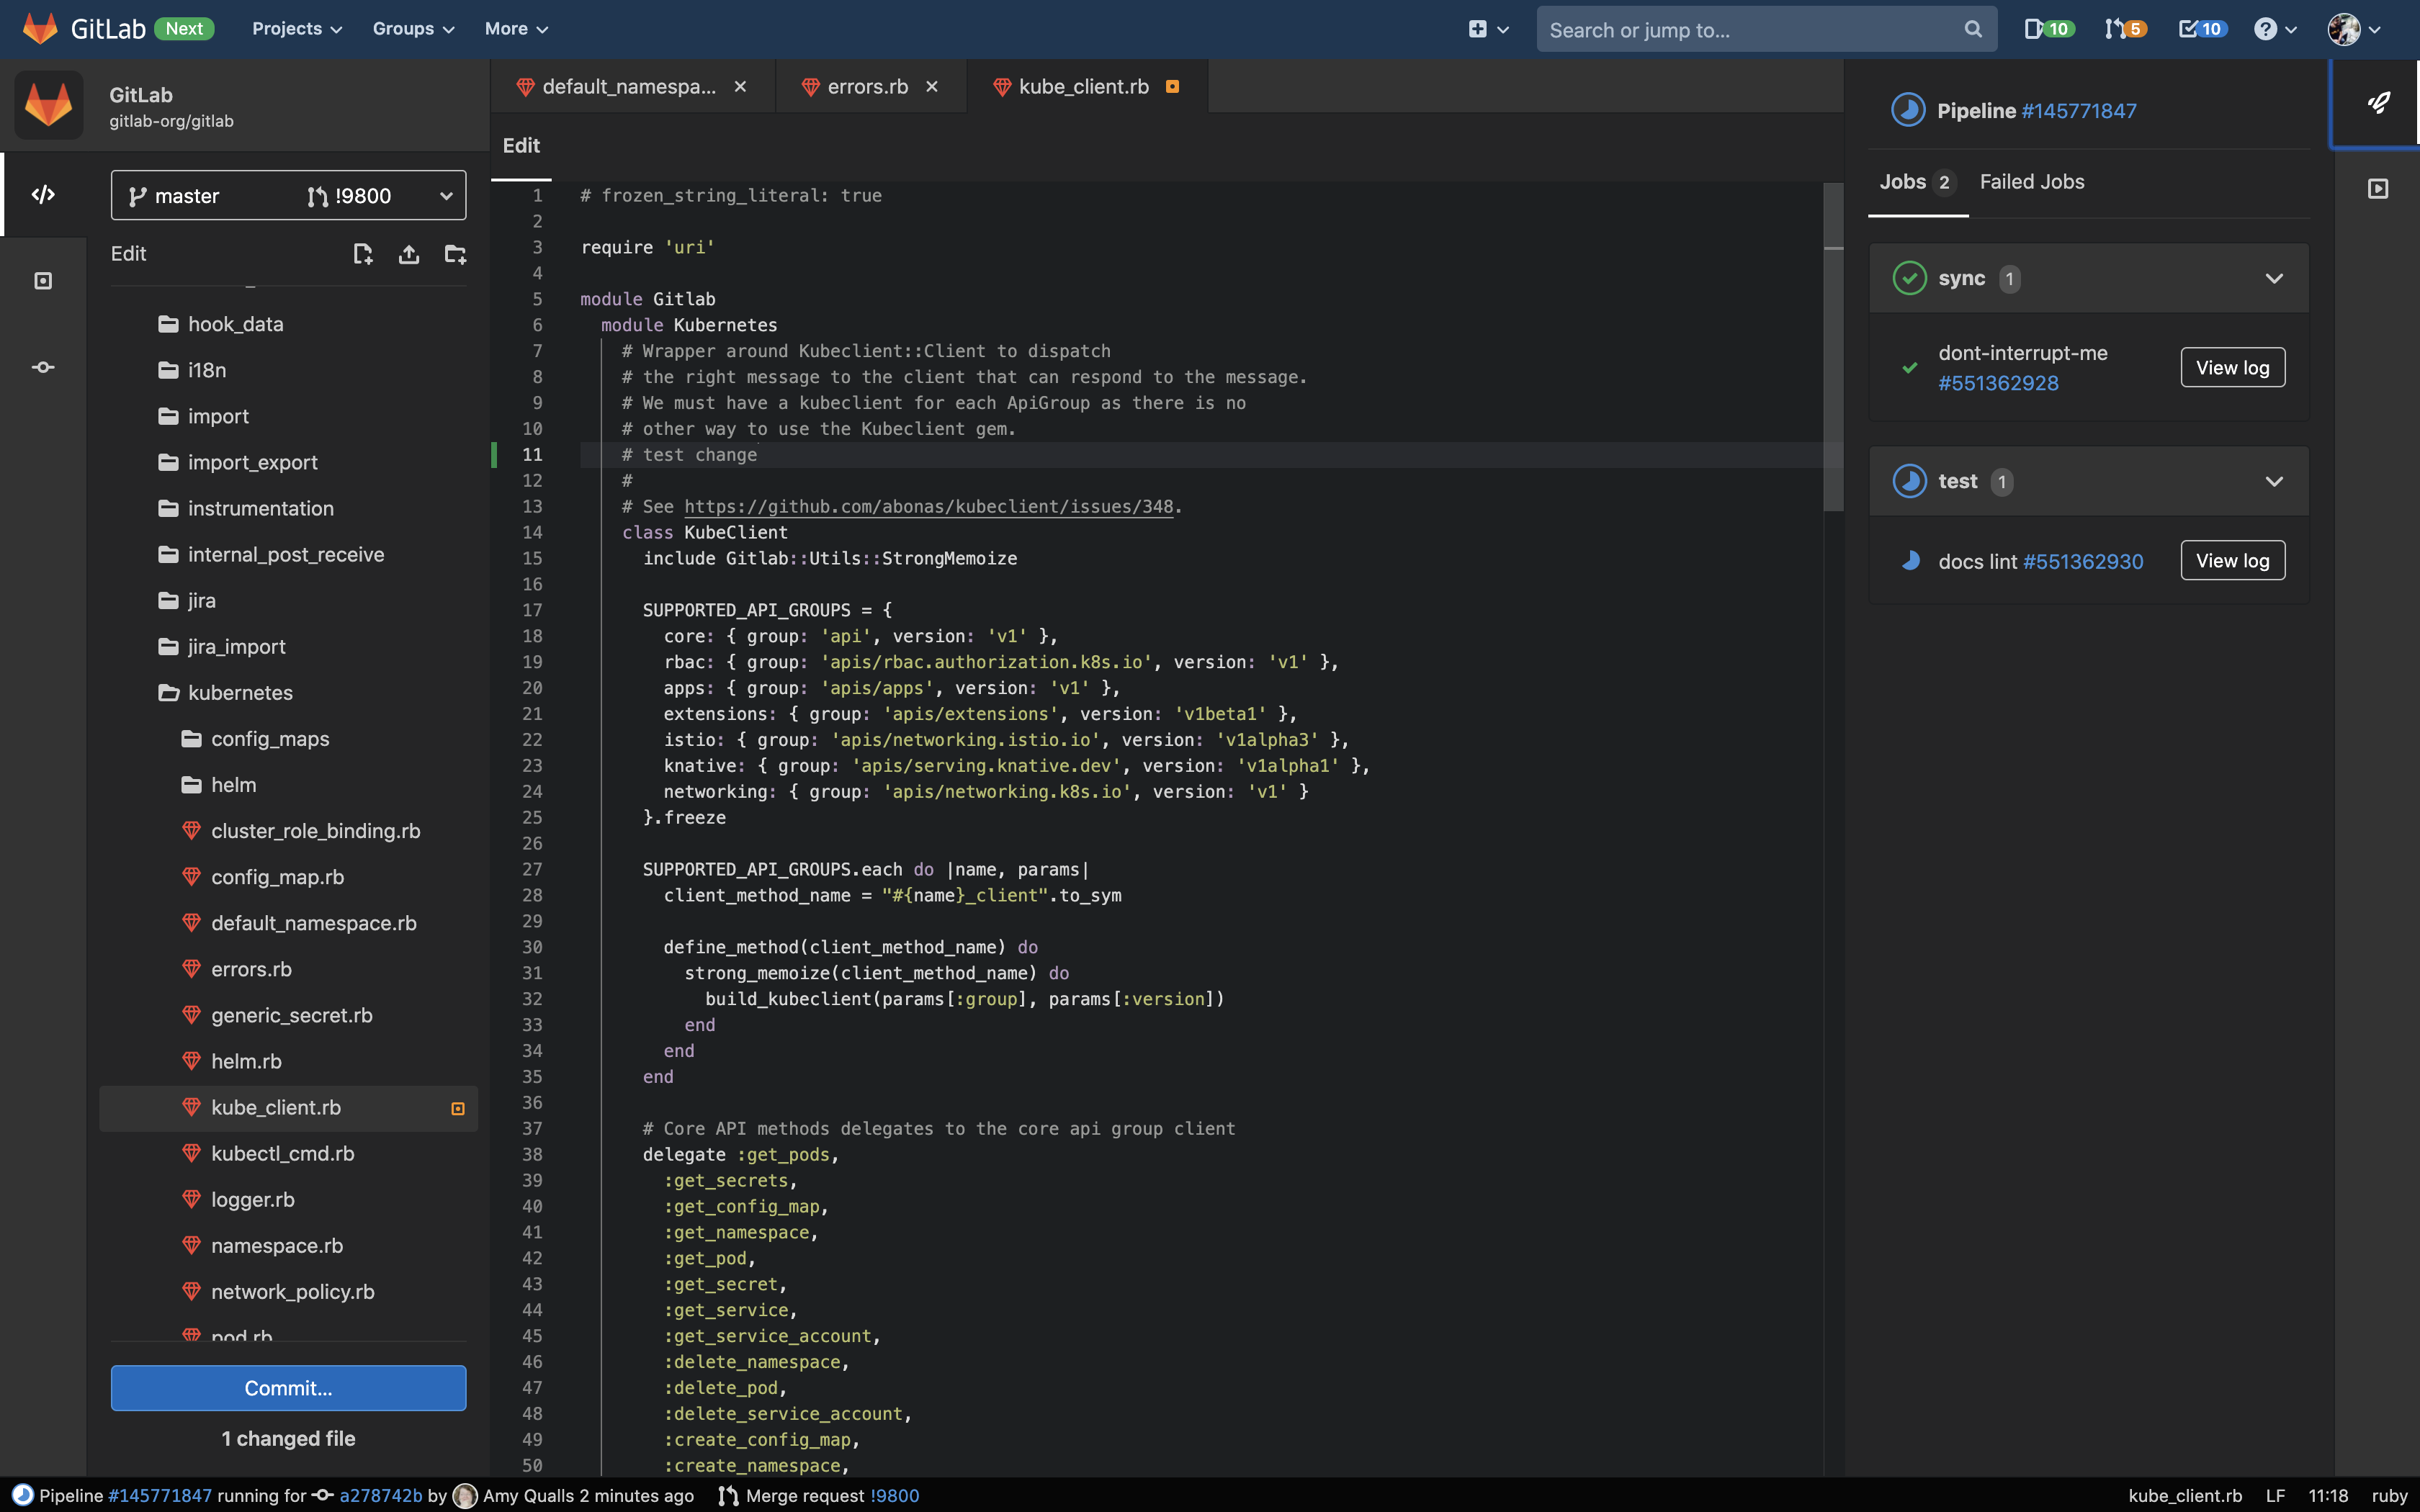 doc/user/project/web_ide/img/dark_theme_v13.0.png